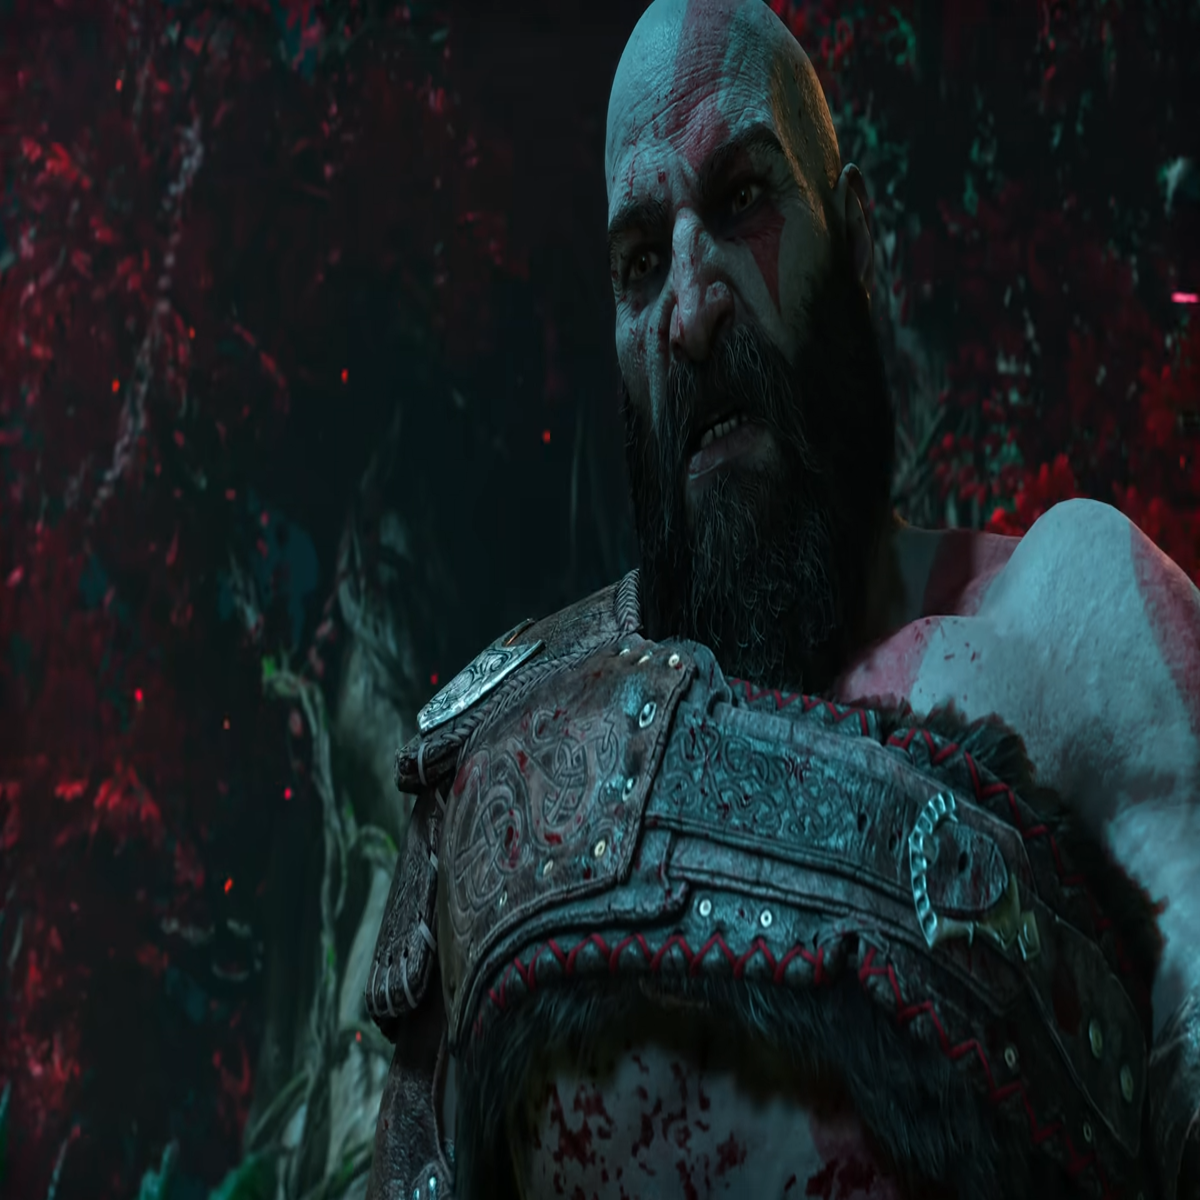 God of War Ragnarok Made to be the “Best PS4 Game”, PS5 Features